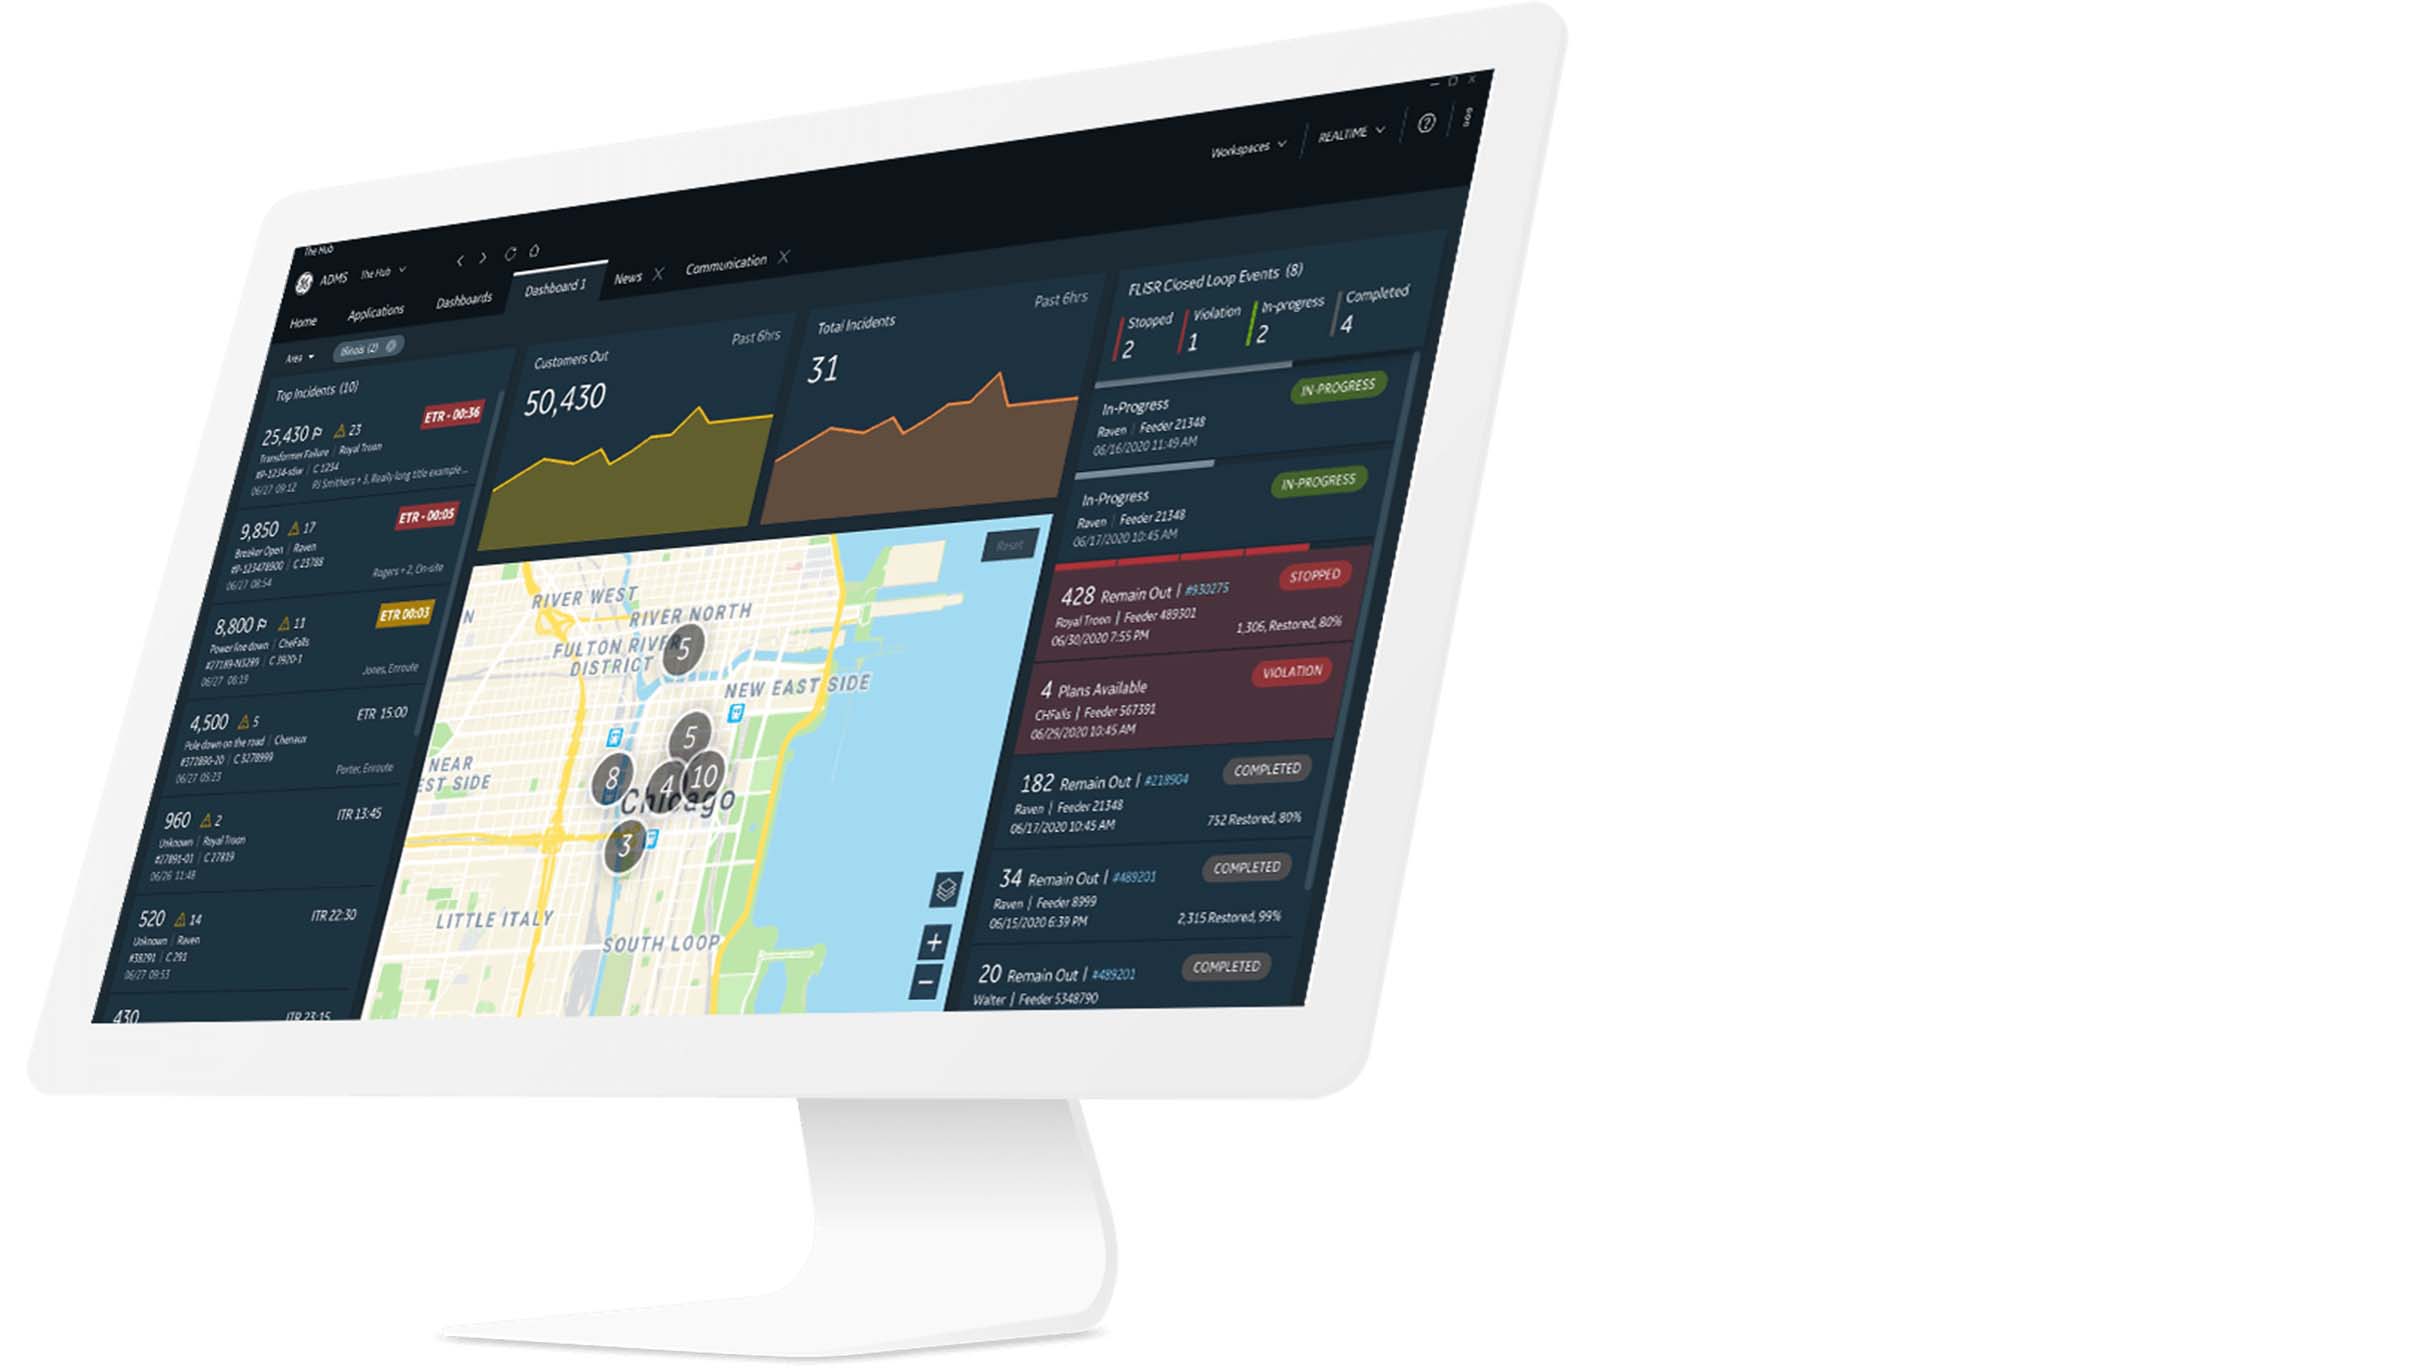 GE Digital's UX/UI is intuitive and helps utility operators manage the grid